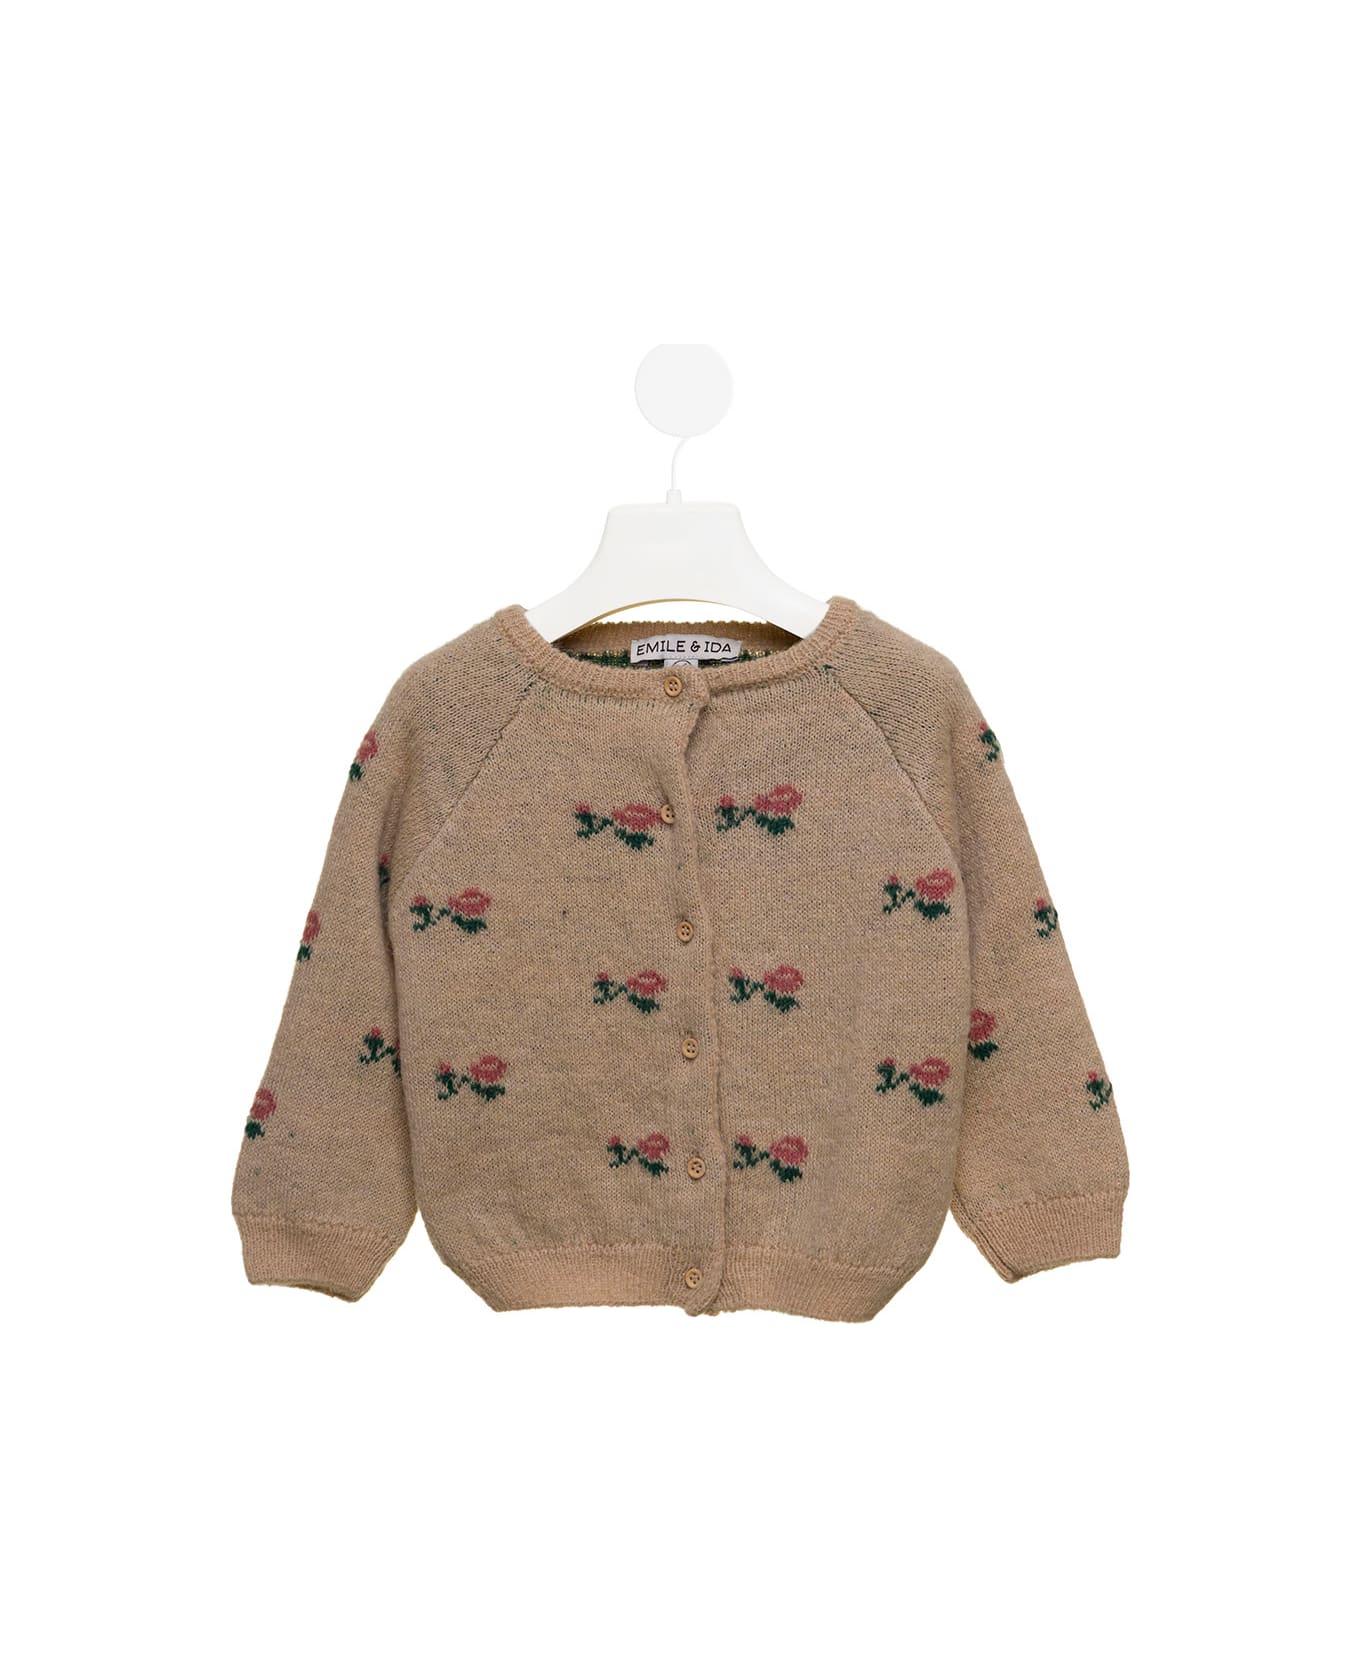 Emile Et Ida Kids Baby's Brown Cardigan With Floral Embroidery - Beige